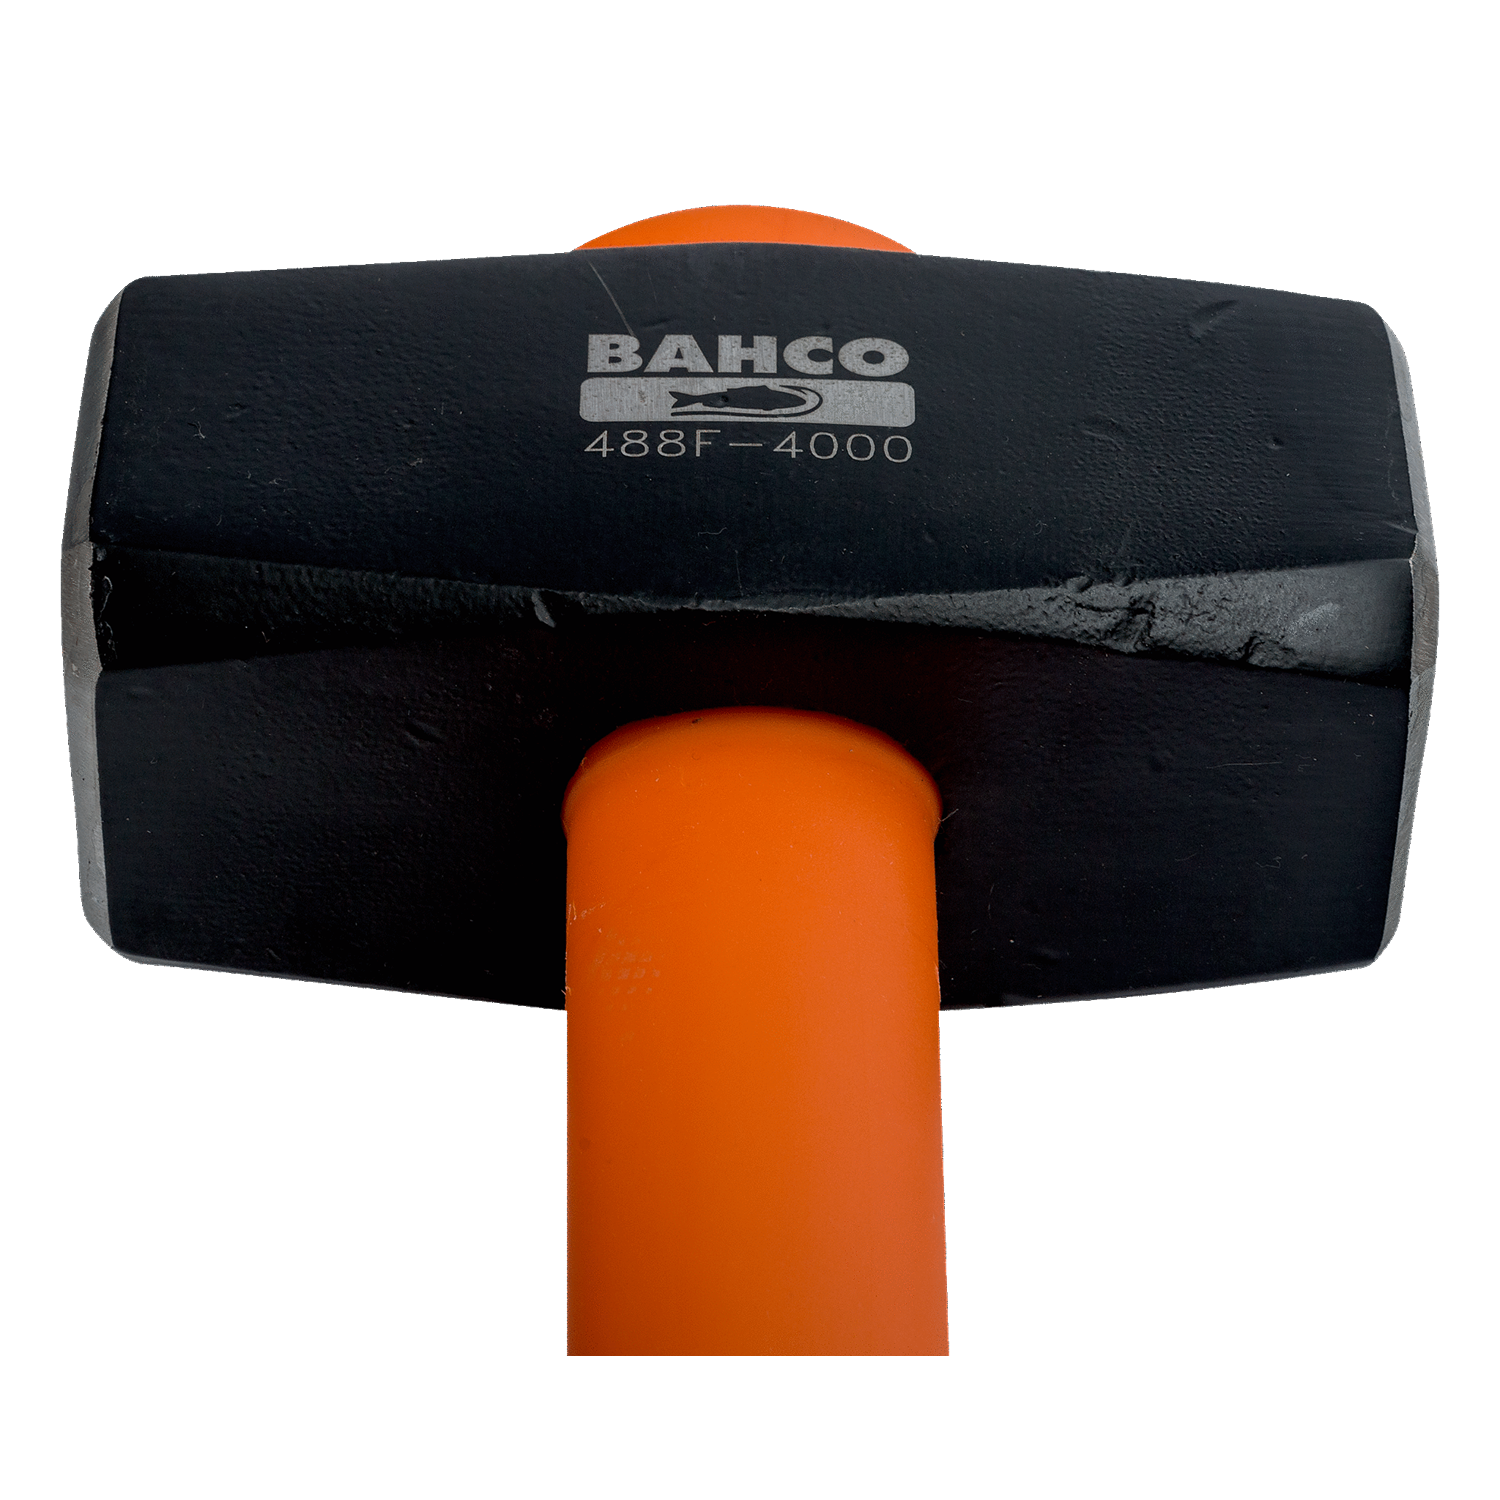 BAHCO 488F Square Head Sledge Hammer with Tri-Material Handle - Premium Sledge Hammer from BAHCO - Shop now at Yew Aik.